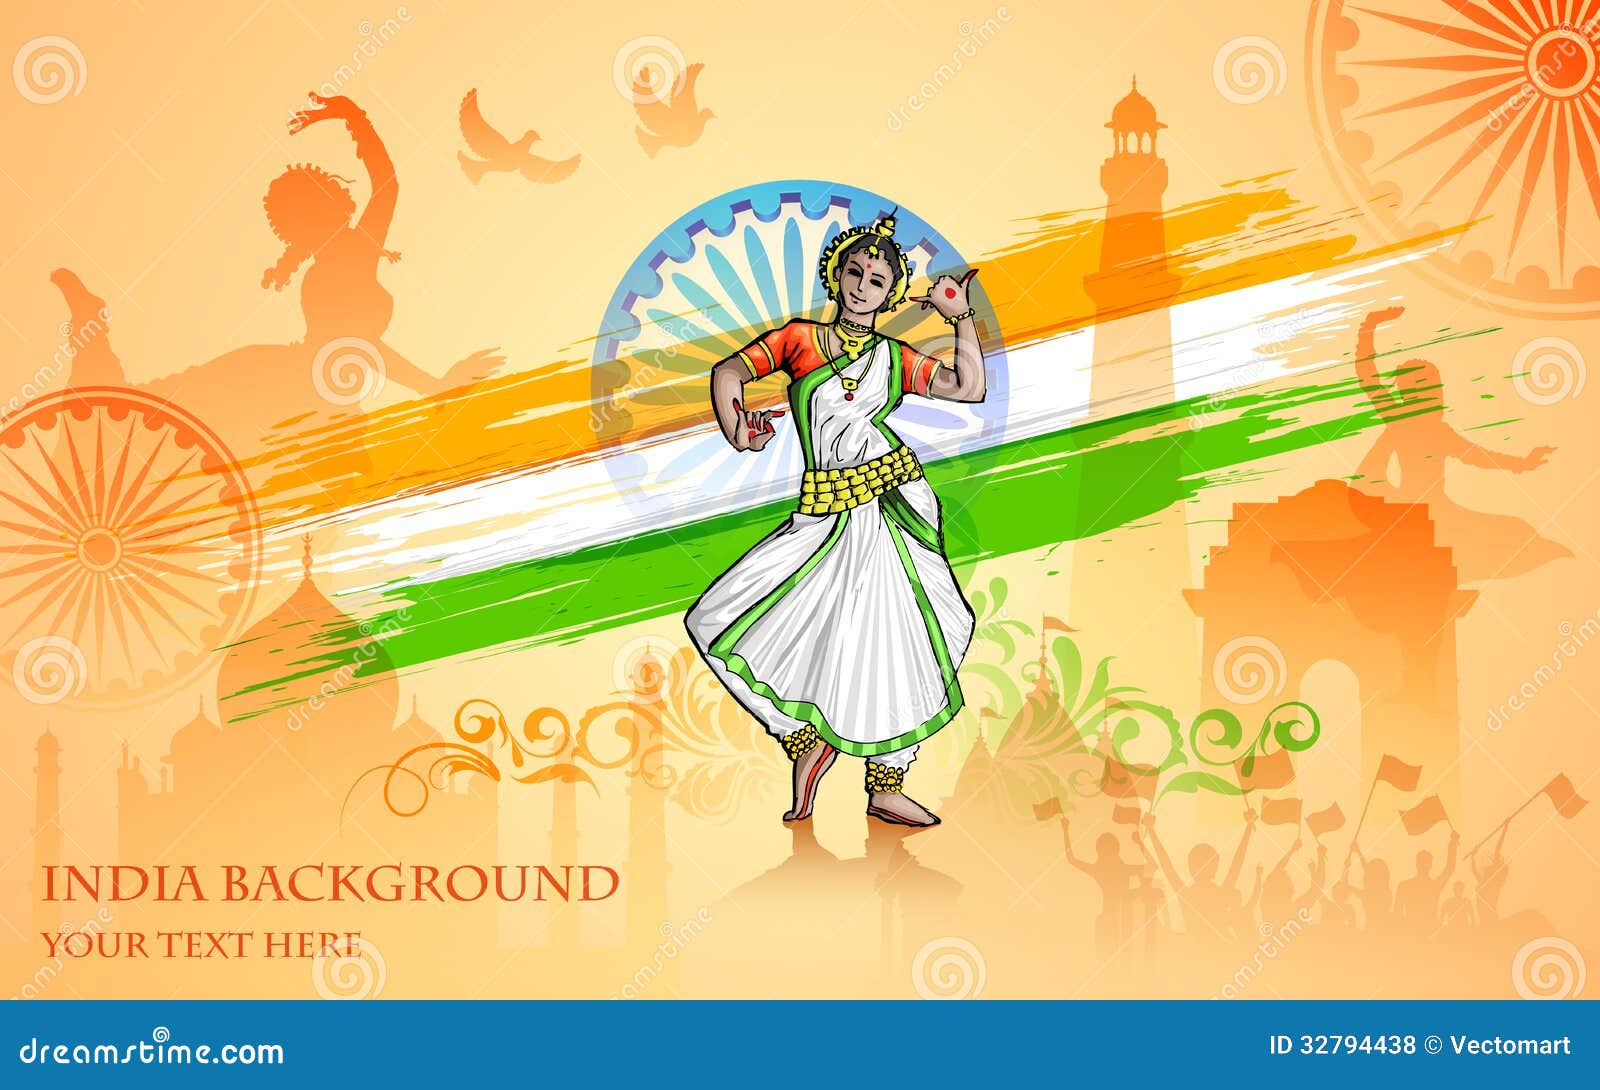 Culture of India stock vector. Illustration of editable - 32794438